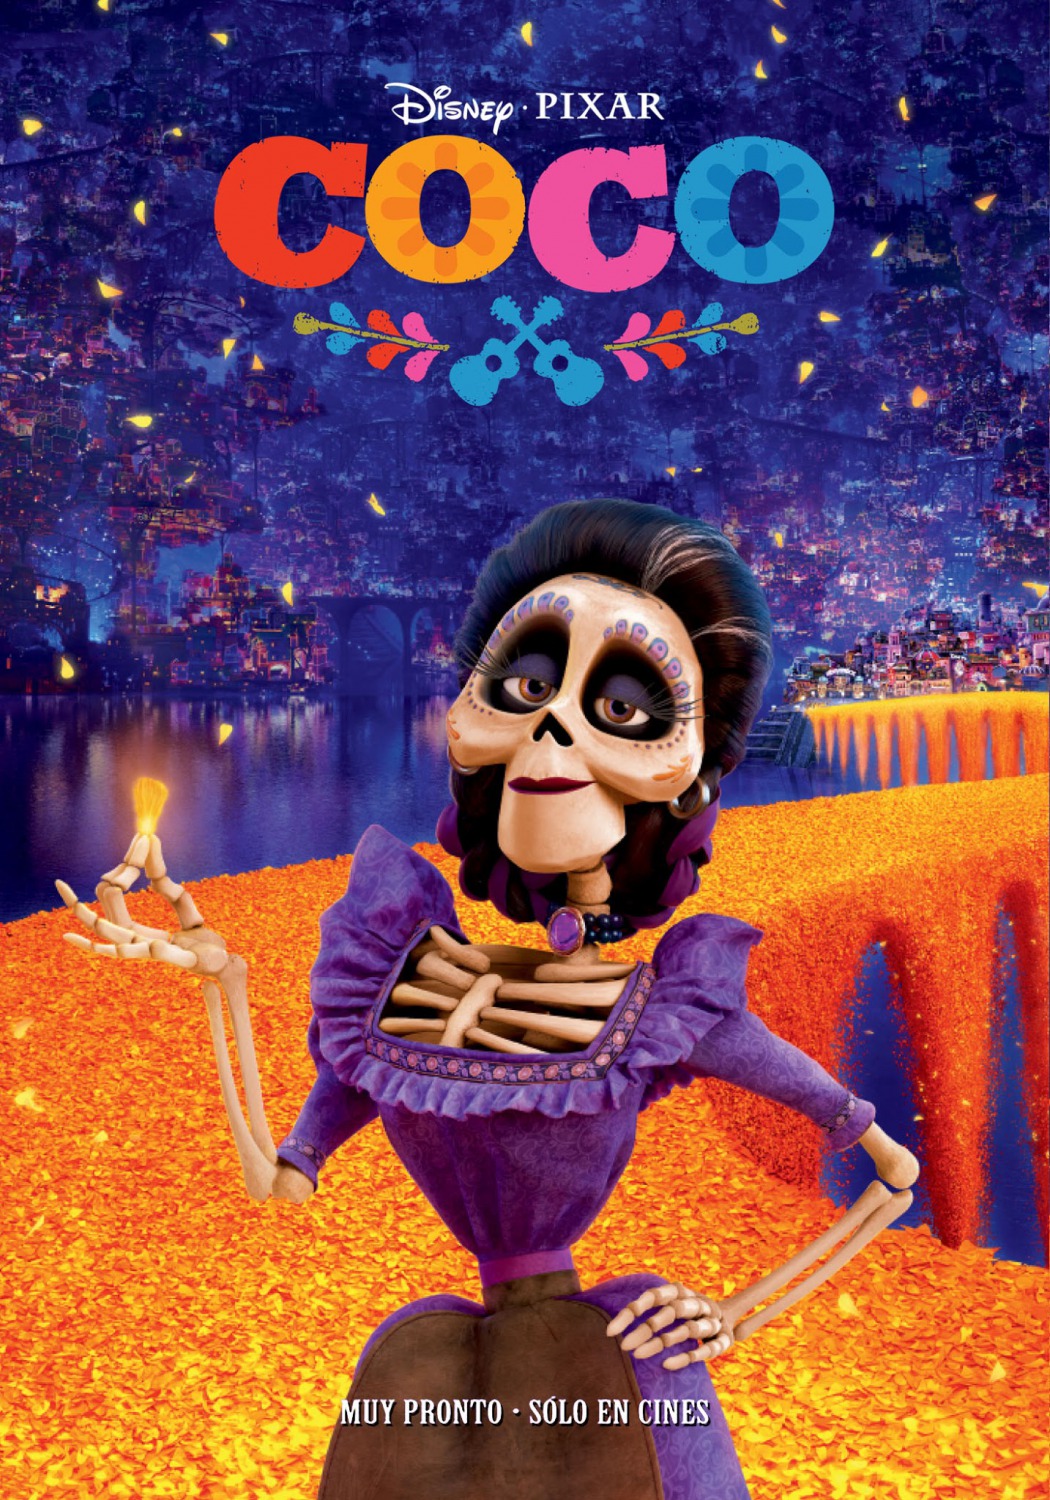 Extra Large Movie Poster Image for Coco (#11 of 17)